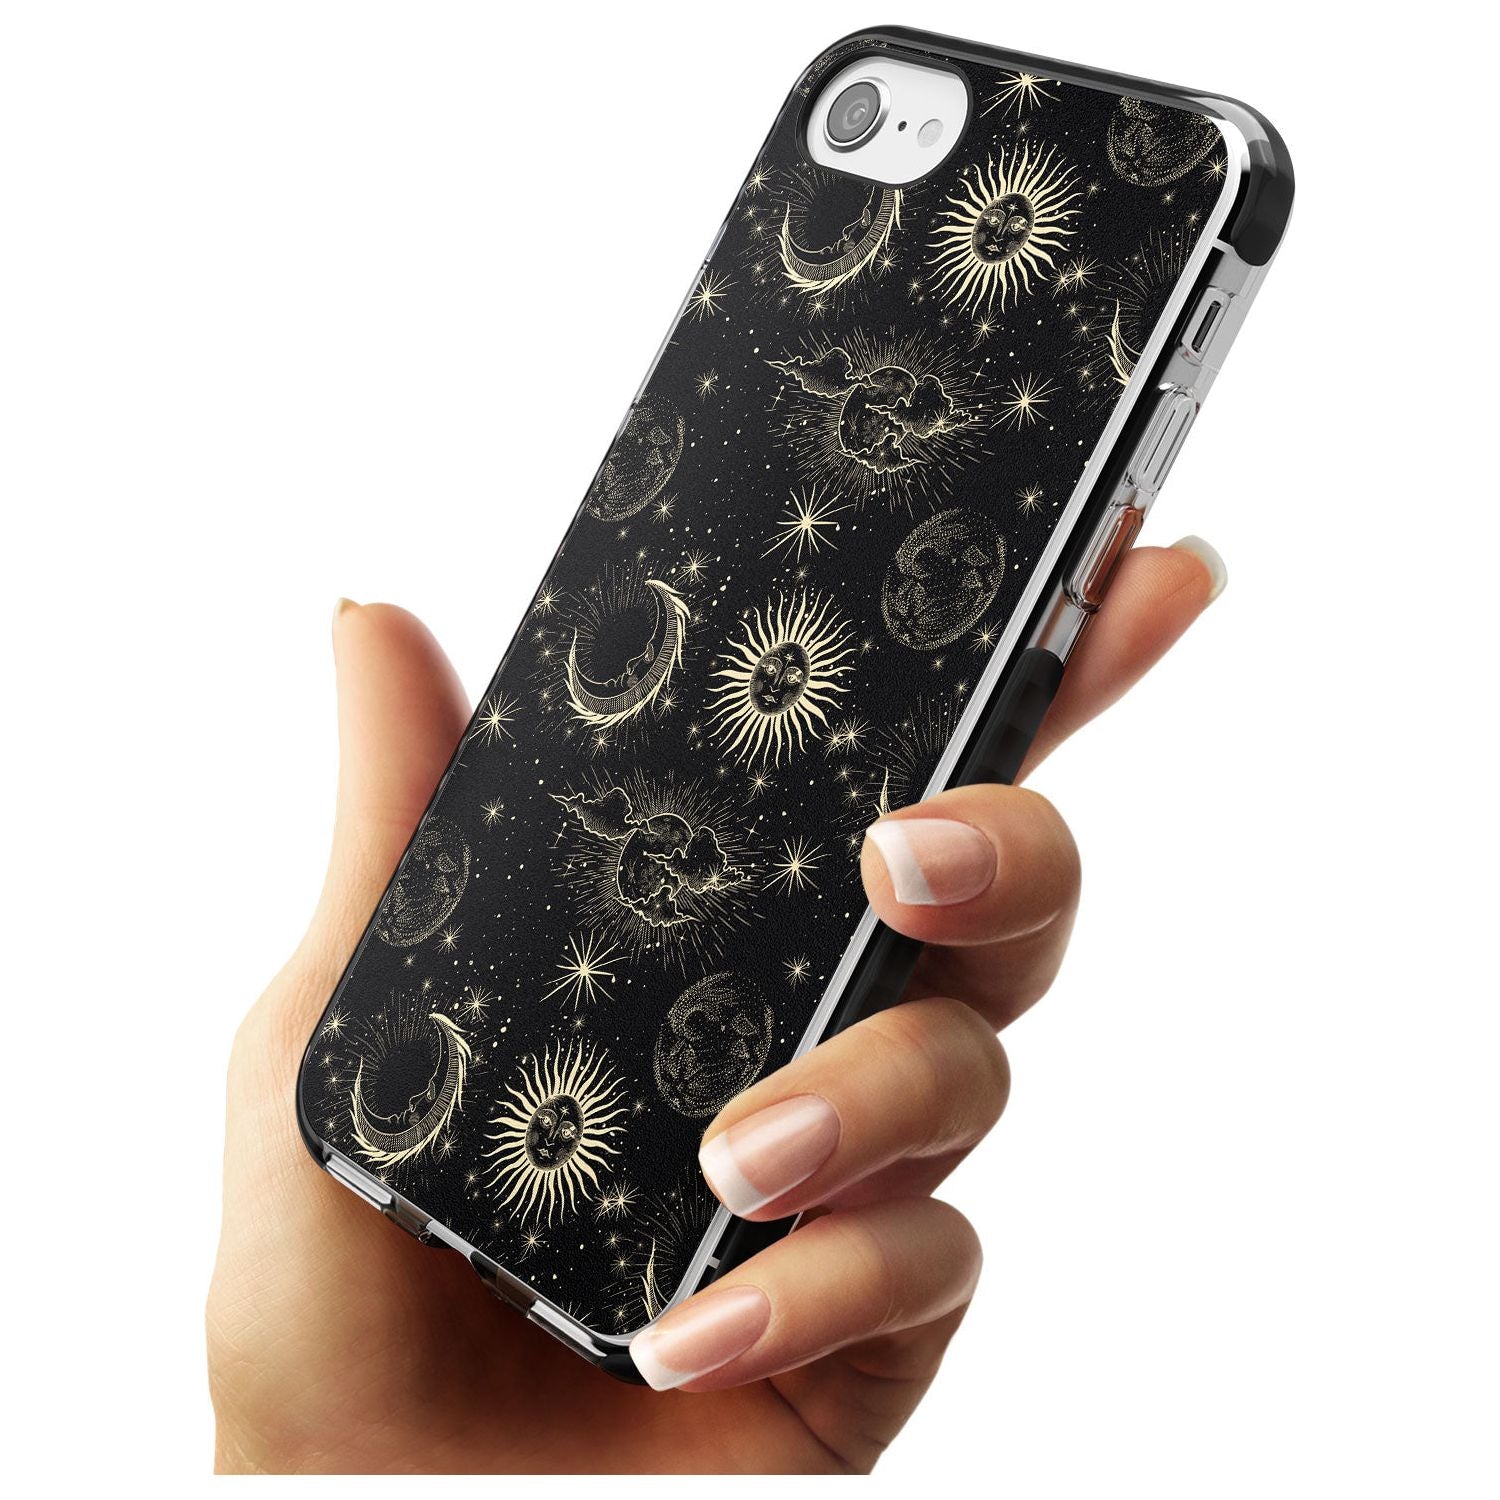 Large Suns, Moons & Clouds Pink Fade Impact Phone Case for iPhone SE 8 7 Plus